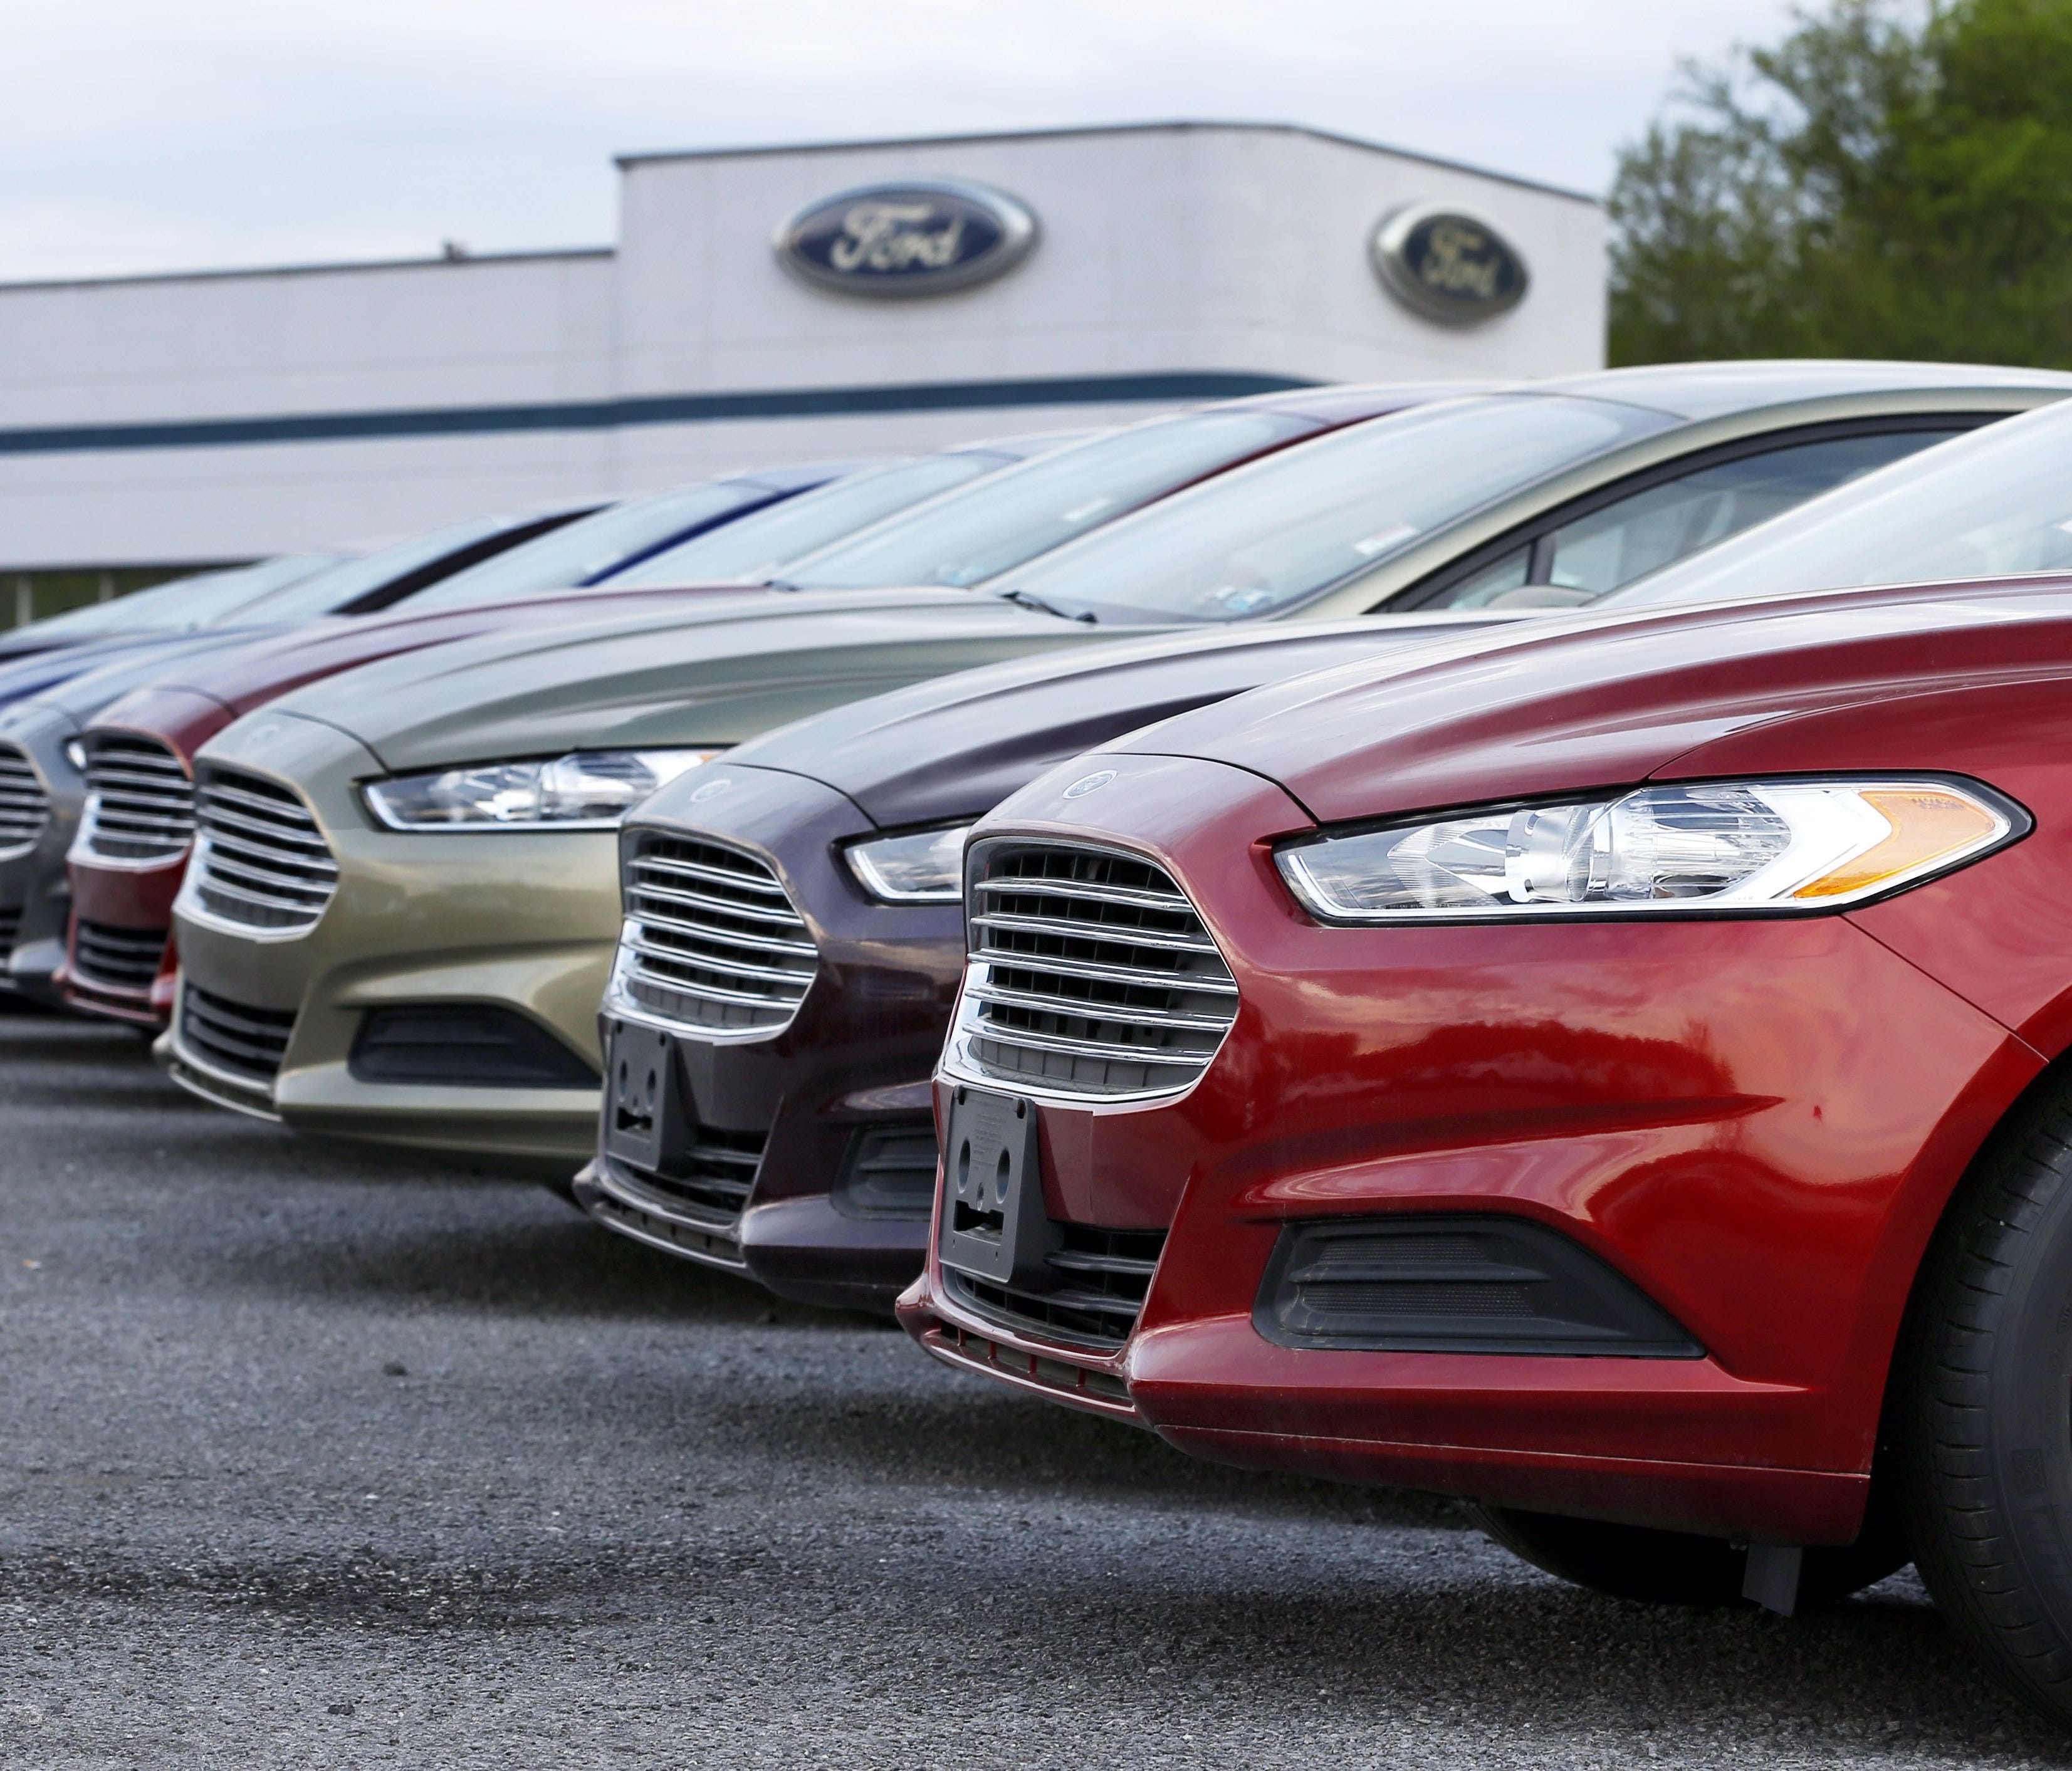 New car sales are still strong but likely to taper off in the second half